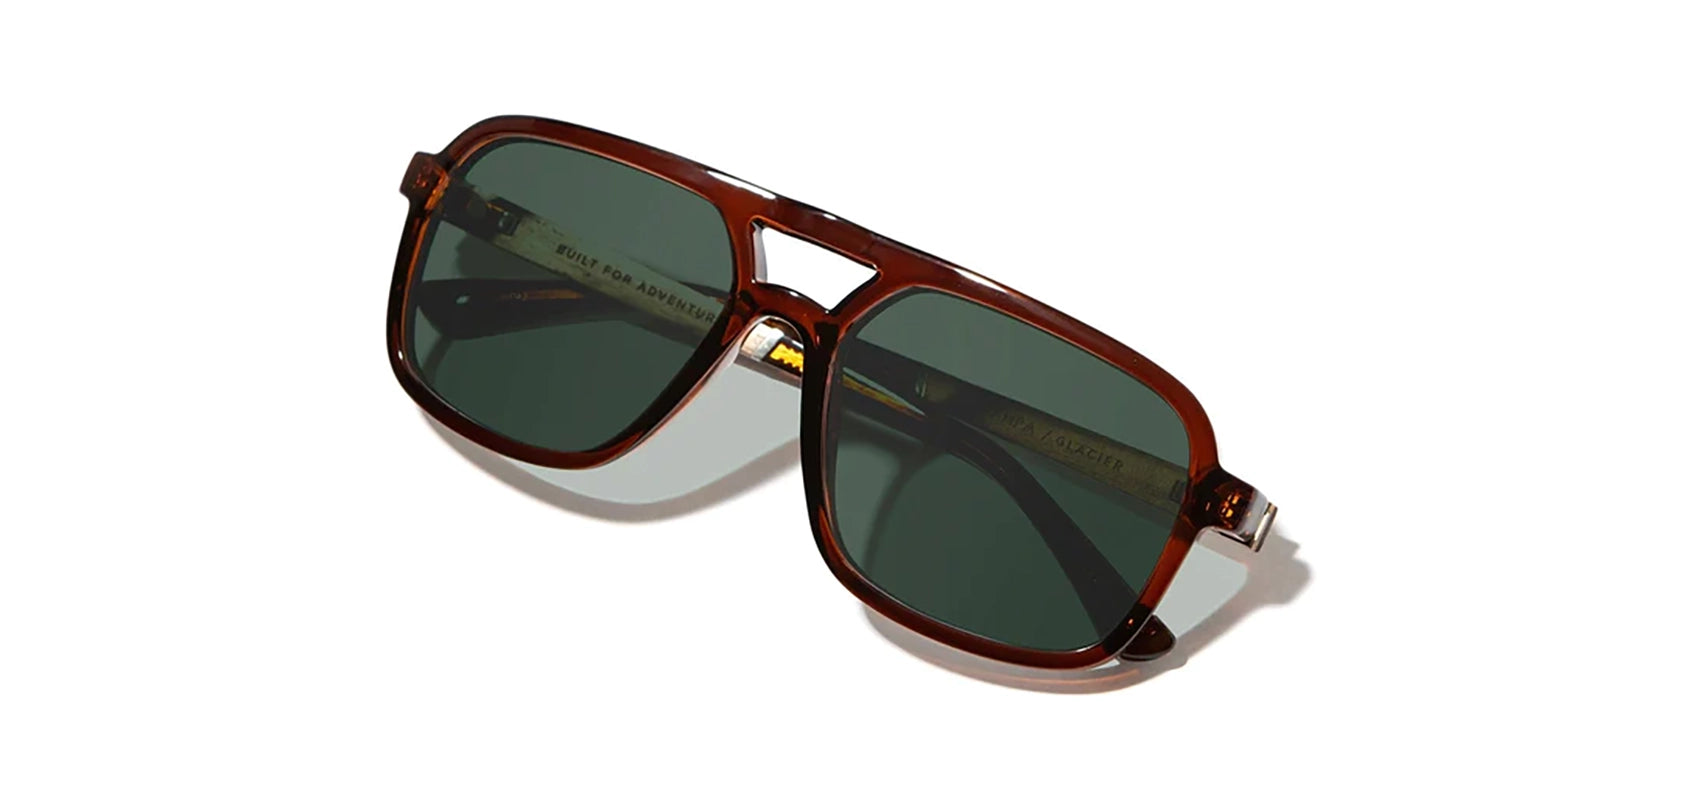 Camp Glacier Sunglasses in Clay & walnut frames, with Grey G15 polarized lenses, front angled closed temple view